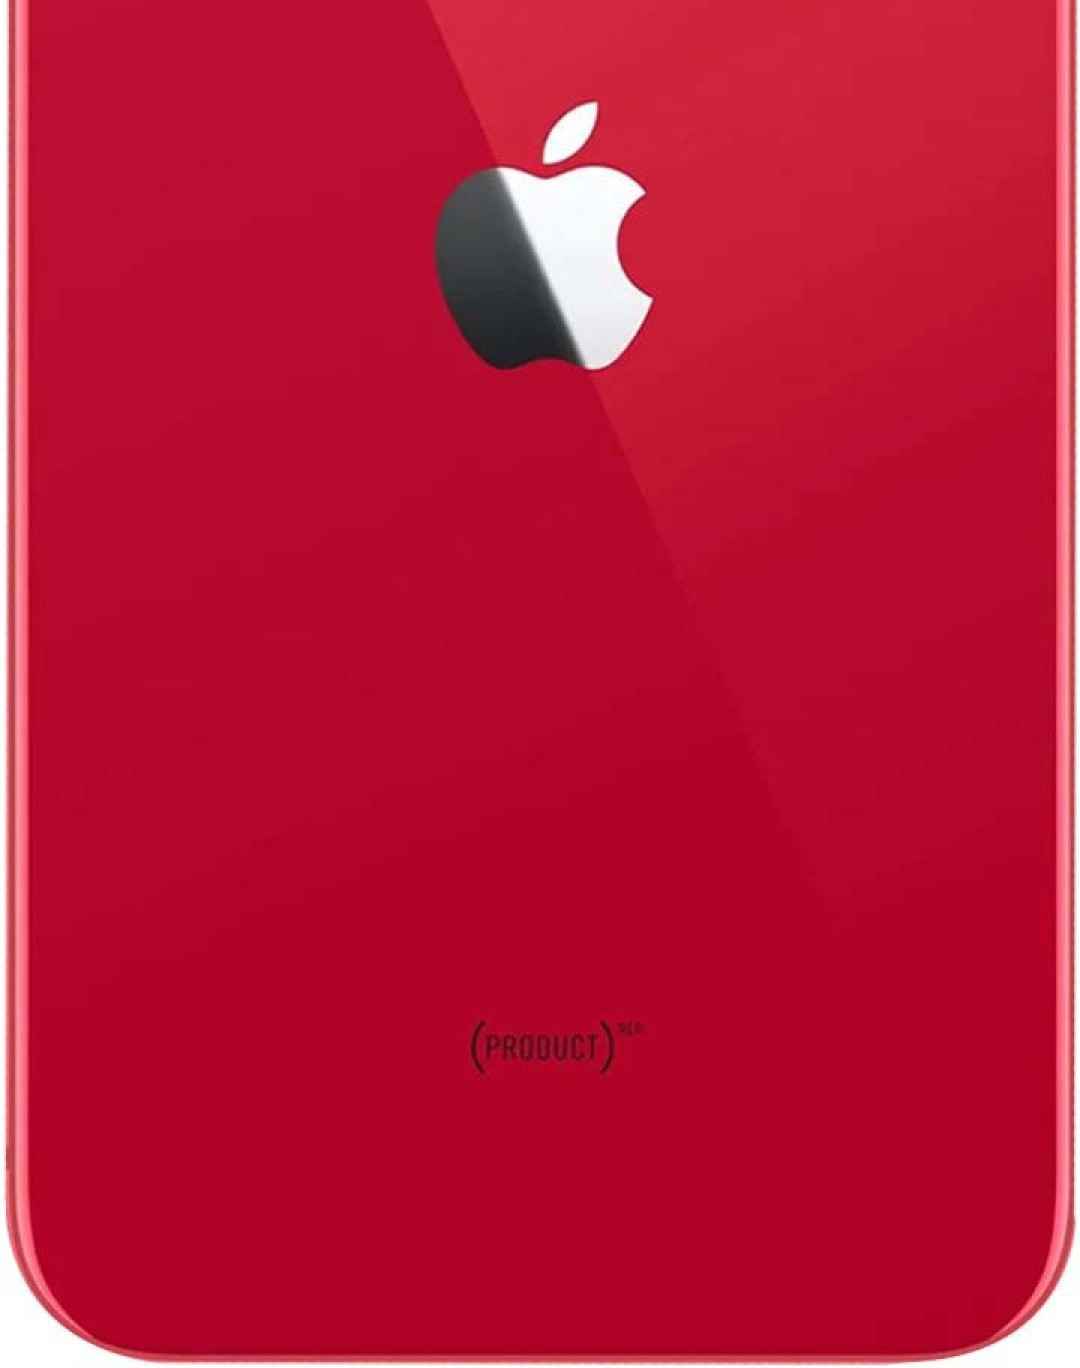 Iphone Replacement Part for Rear(Back) Glass Panel Compatible with (iPhone 11 ) 1yr  Warranty  - Red